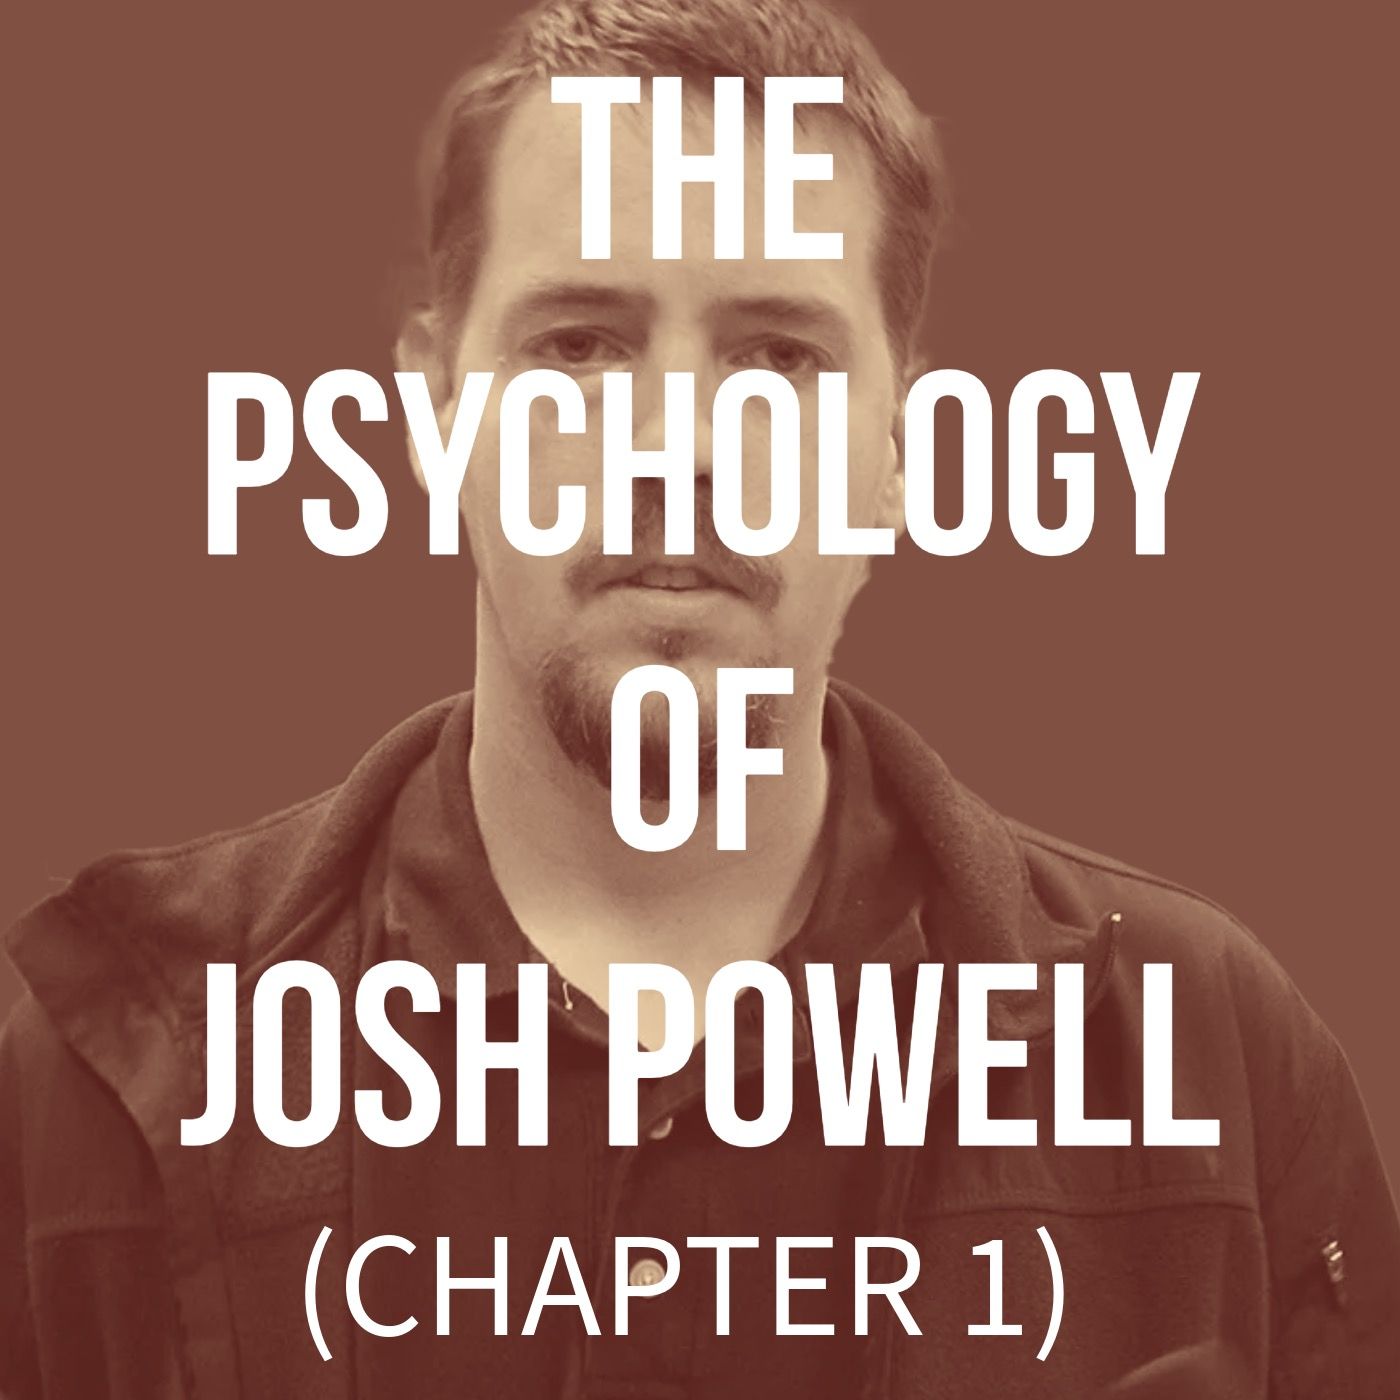 The Psychology of Josh Powell (Chapter 1 - Exposure)